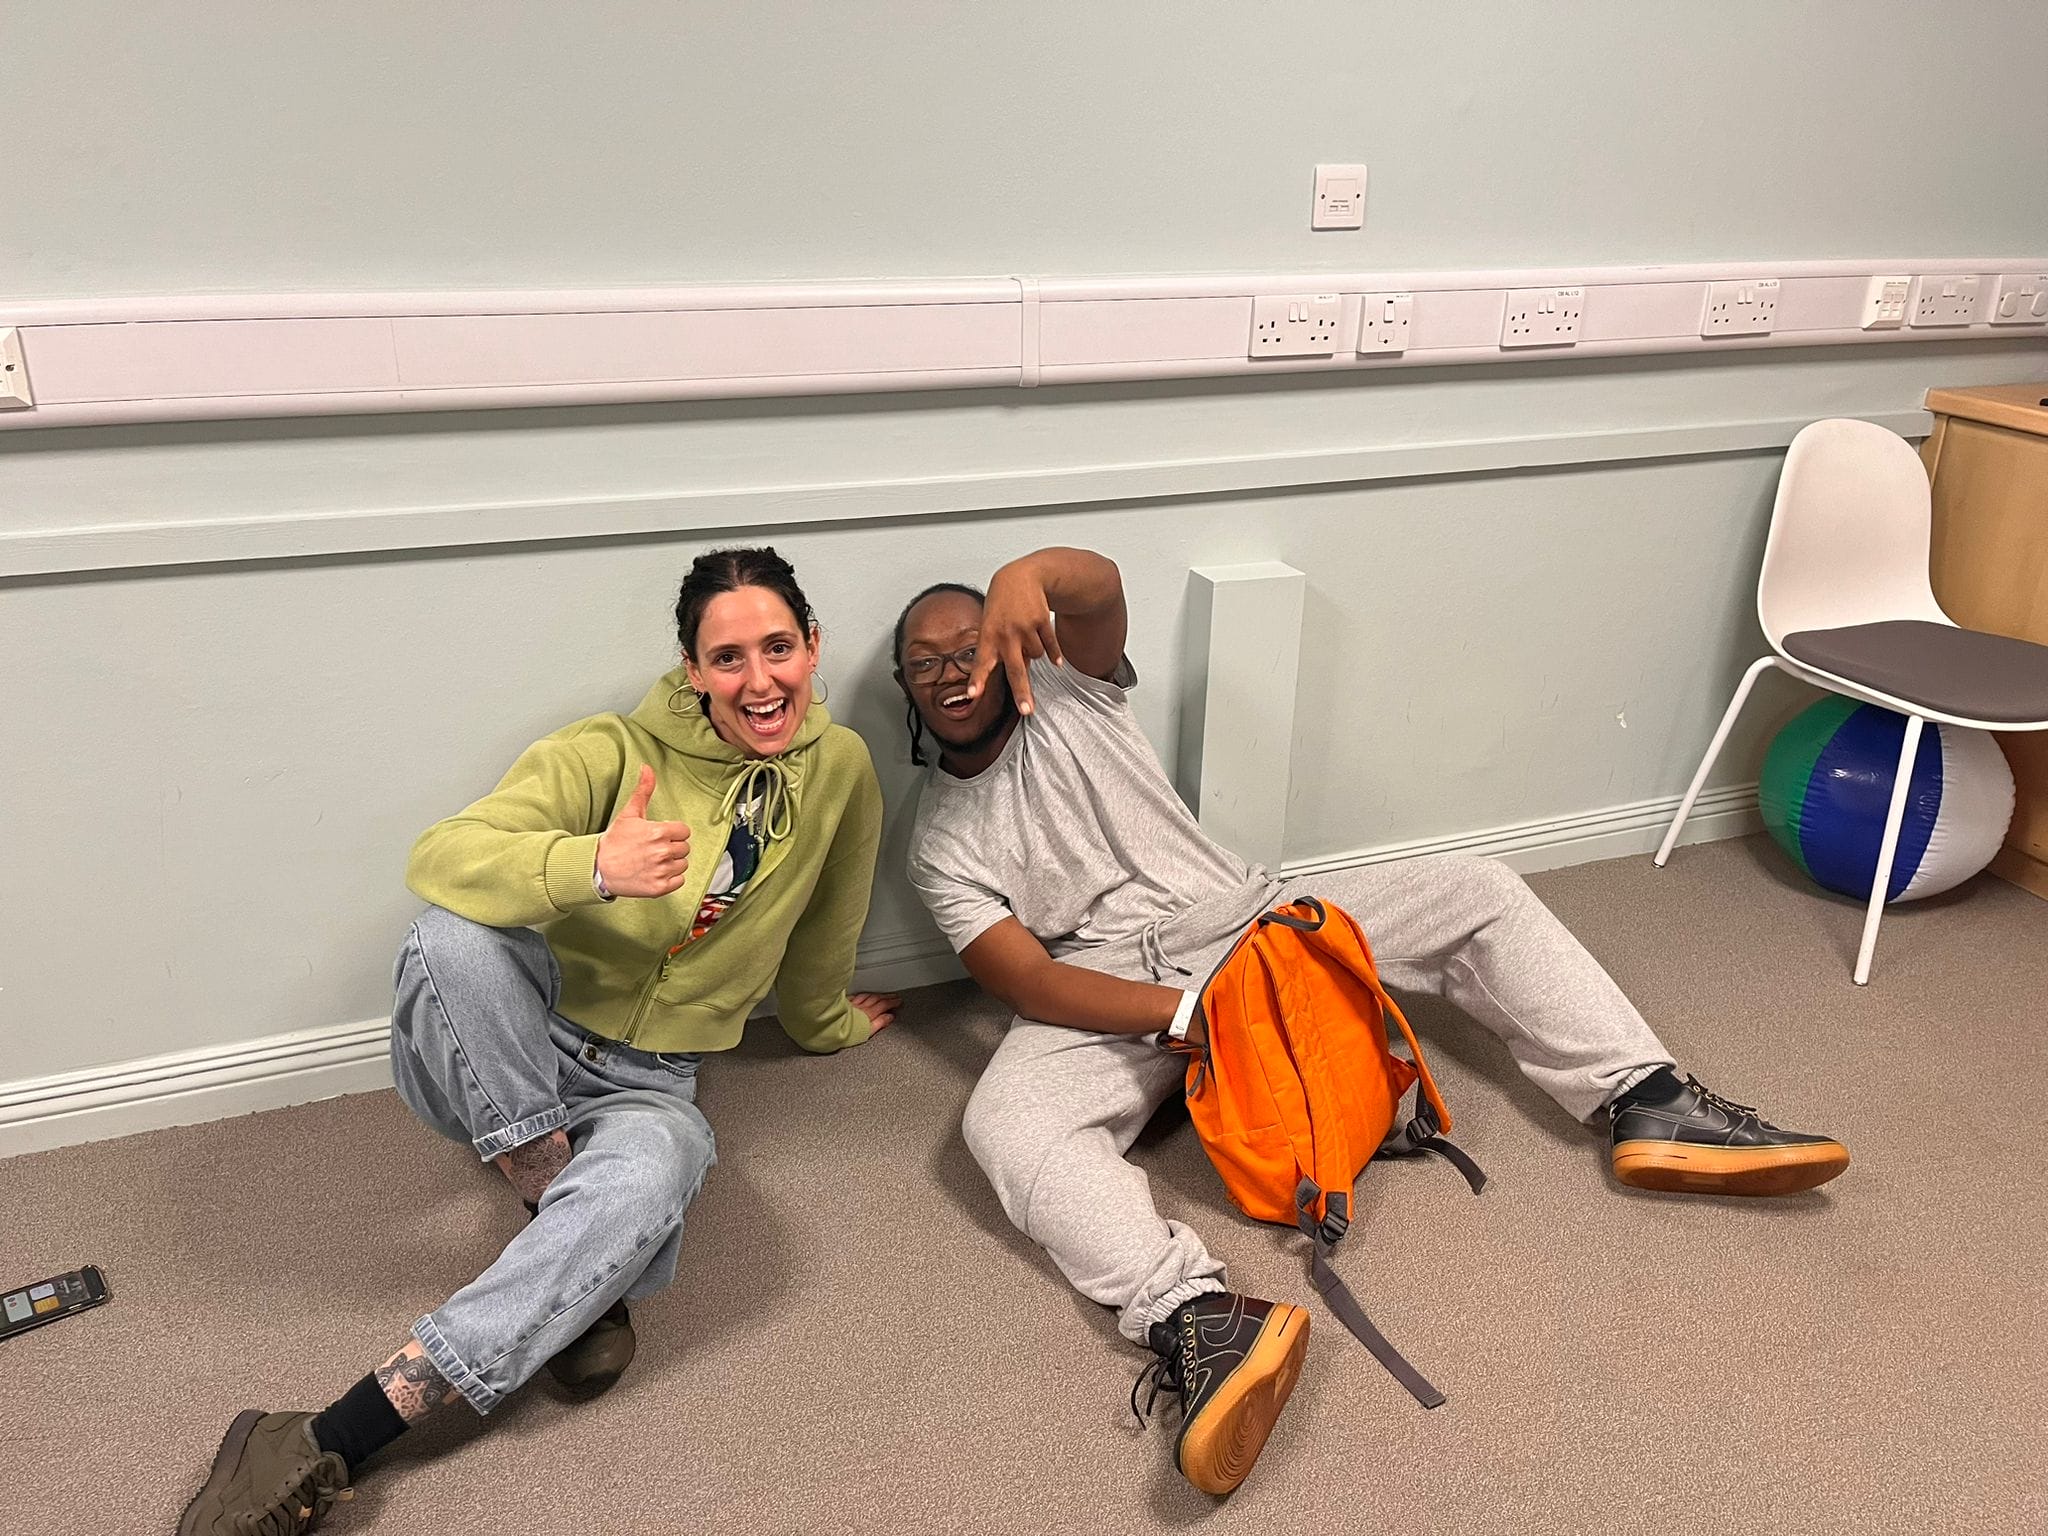 Stella and Marcus sitting together on the floor. Stella is wearing a green hoodie and jeans. Marcus is wearing a grey shirt, grey joggers, and is holding an orange backpack.